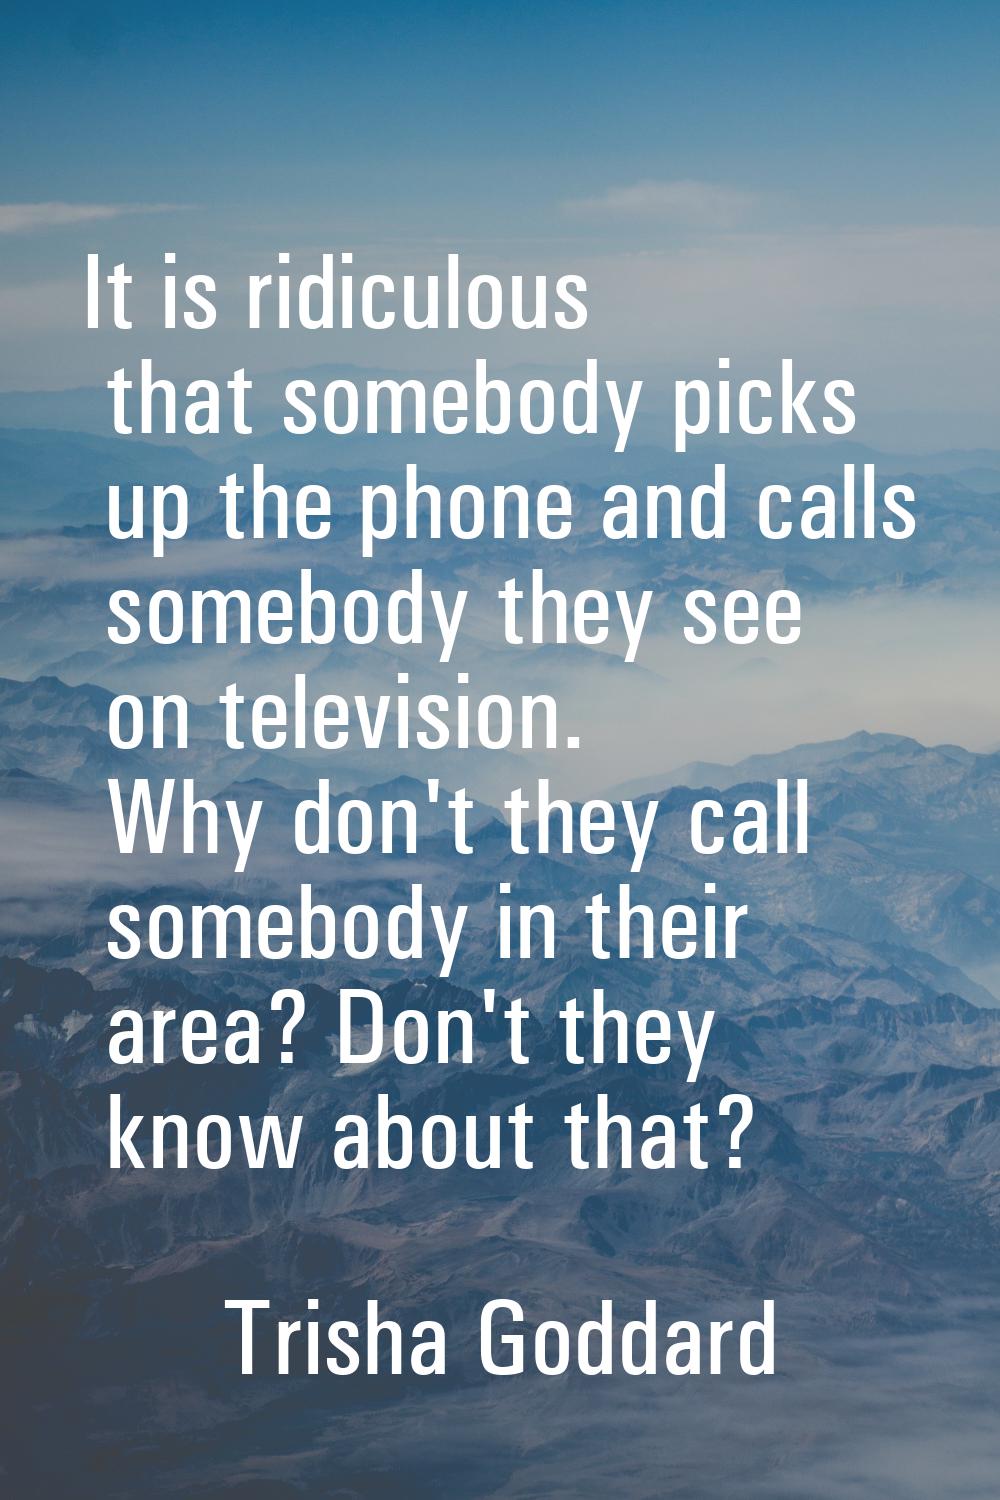 It is ridiculous that somebody picks up the phone and calls somebody they see on television. Why do